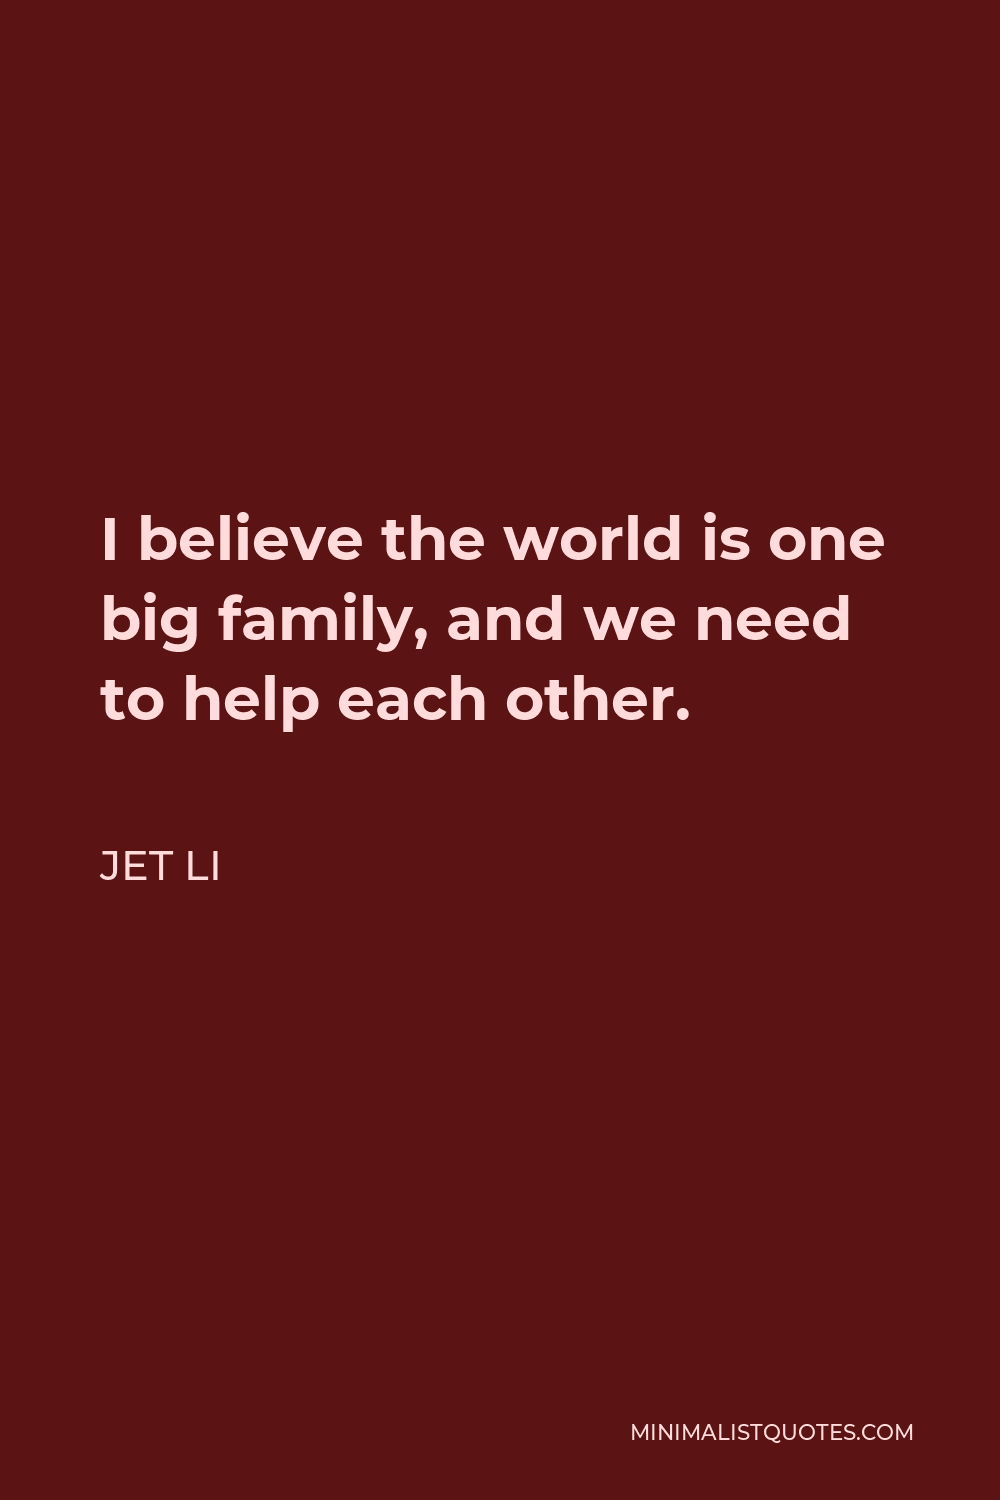 Jet Li Quote - I believe the world is one big family, and we need to help each other.